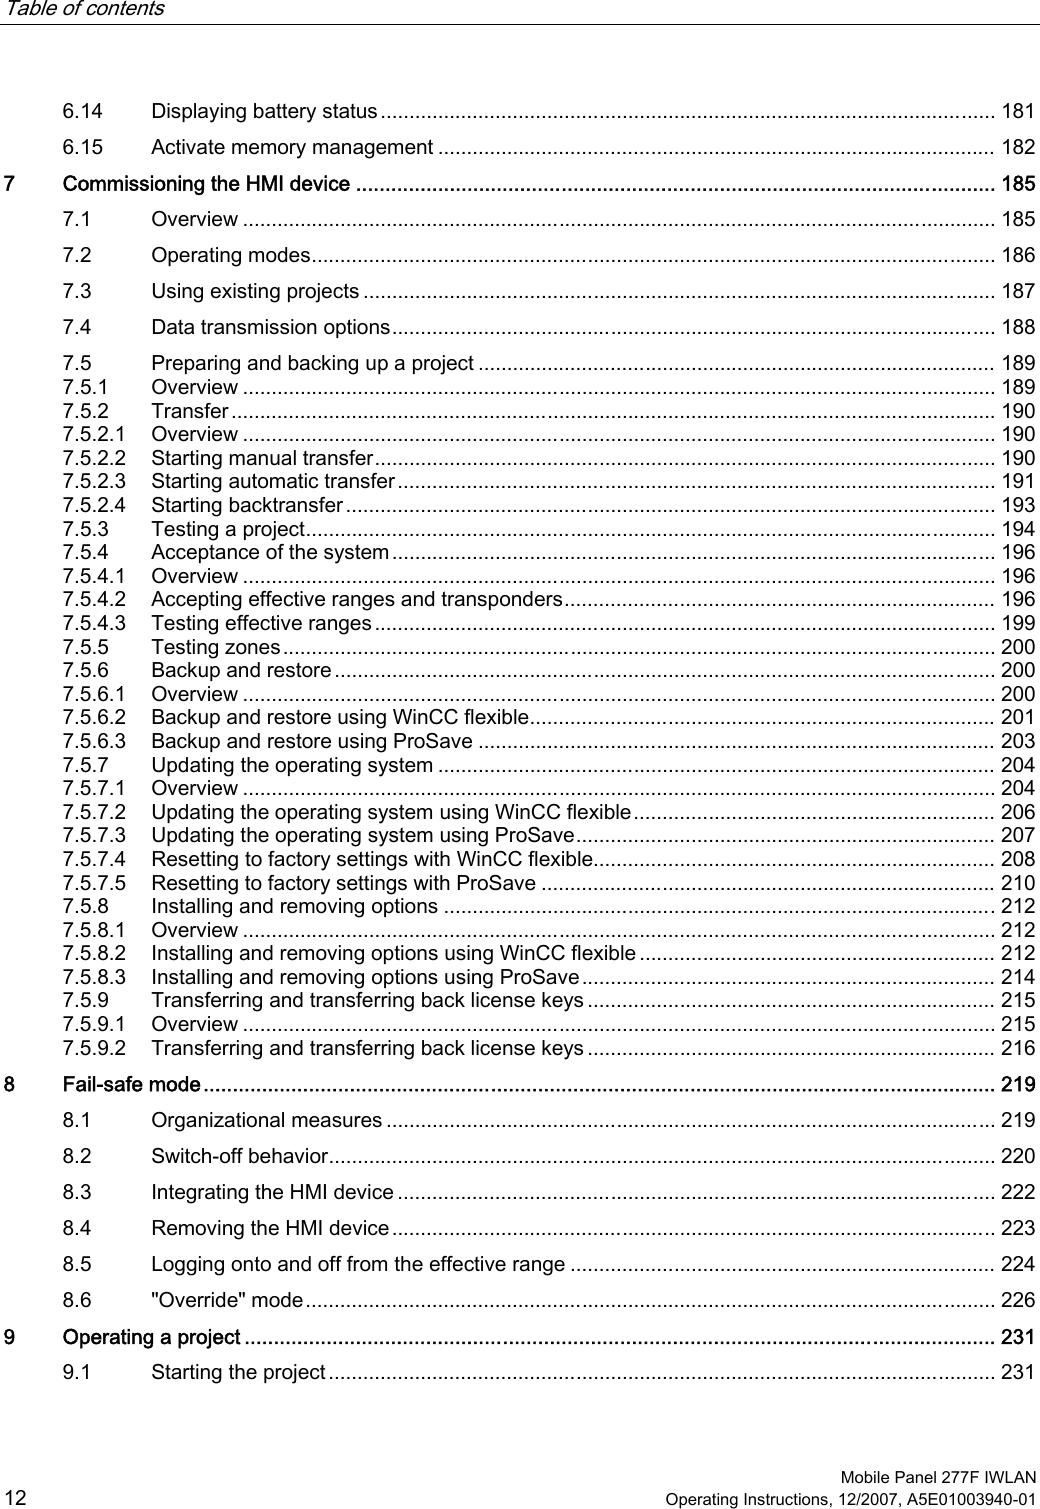 Table of contents      Mobile Panel 277F IWLAN 12 Operating Instructions, 12/2007, A5E01003940-01 6.14  Displaying battery status........................................................................................................... 181 6.15  Activate memory management ................................................................................................. 182 7  Commissioning the HMI device ............................................................................................................. 185 7.1  Overview ................................................................................................................................... 185 7.2  Operating modes....................................................................................................................... 186 7.3  Using existing projects .............................................................................................................. 187 7.4  Data transmission options......................................................................................................... 188 7.5  Preparing and backing up a project .......................................................................................... 189 7.5.1  Overview ................................................................................................................................... 189 7.5.2  Transfer..................................................................................................................................... 190 7.5.2.1  Overview ................................................................................................................................... 190 7.5.2.2  Starting manual transfer............................................................................................................ 190 7.5.2.3  Starting automatic transfer........................................................................................................ 191 7.5.2.4  Starting backtransfer ................................................................................................................. 193 7.5.3  Testing a project........................................................................................................................ 194 7.5.4  Acceptance of the system......................................................................................................... 196 7.5.4.1  Overview ................................................................................................................................... 196 7.5.4.2  Accepting effective ranges and transponders........................................................................... 196 7.5.4.3  Testing effective ranges............................................................................................................ 199 7.5.5  Testing zones............................................................................................................................ 200 7.5.6  Backup and restore ................................................................................................................... 200 7.5.6.1  Overview ................................................................................................................................... 200 7.5.6.2  Backup and restore using WinCC flexible................................................................................. 201 7.5.6.3  Backup and restore using ProSave .......................................................................................... 203 7.5.7  Updating the operating system ................................................................................................. 204 7.5.7.1  Overview ................................................................................................................................... 204 7.5.7.2  Updating the operating system using WinCC flexible............................................................... 206 7.5.7.3  Updating the operating system using ProSave......................................................................... 207 7.5.7.4  Resetting to factory settings with WinCC flexible...................................................................... 208 7.5.7.5  Resetting to factory settings with ProSave ............................................................................... 210 7.5.8  Installing and removing options ................................................................................................212 7.5.8.1  Overview ................................................................................................................................... 212 7.5.8.2  Installing and removing options using WinCC flexible .............................................................. 212 7.5.8.3  Installing and removing options using ProSave........................................................................ 214 7.5.9  Transferring and transferring back license keys ....................................................................... 215 7.5.9.1  Overview ................................................................................................................................... 215 7.5.9.2  Transferring and transferring back license keys ....................................................................... 216 8  Fail-safe mode....................................................................................................................................... 219 8.1  Organizational measures .......................................................................................................... 219 8.2  Switch-off behavior.................................................................................................................... 220 8.3  Integrating the HMI device ........................................................................................................ 222 8.4  Removing the HMI device......................................................................................................... 223 8.5  Logging onto and off from the effective range .......................................................................... 224 8.6  &quot;Override&quot; mode........................................................................................................................ 226 9  Operating a project ................................................................................................................................ 231 9.1  Starting the project .................................................................................................................... 231 